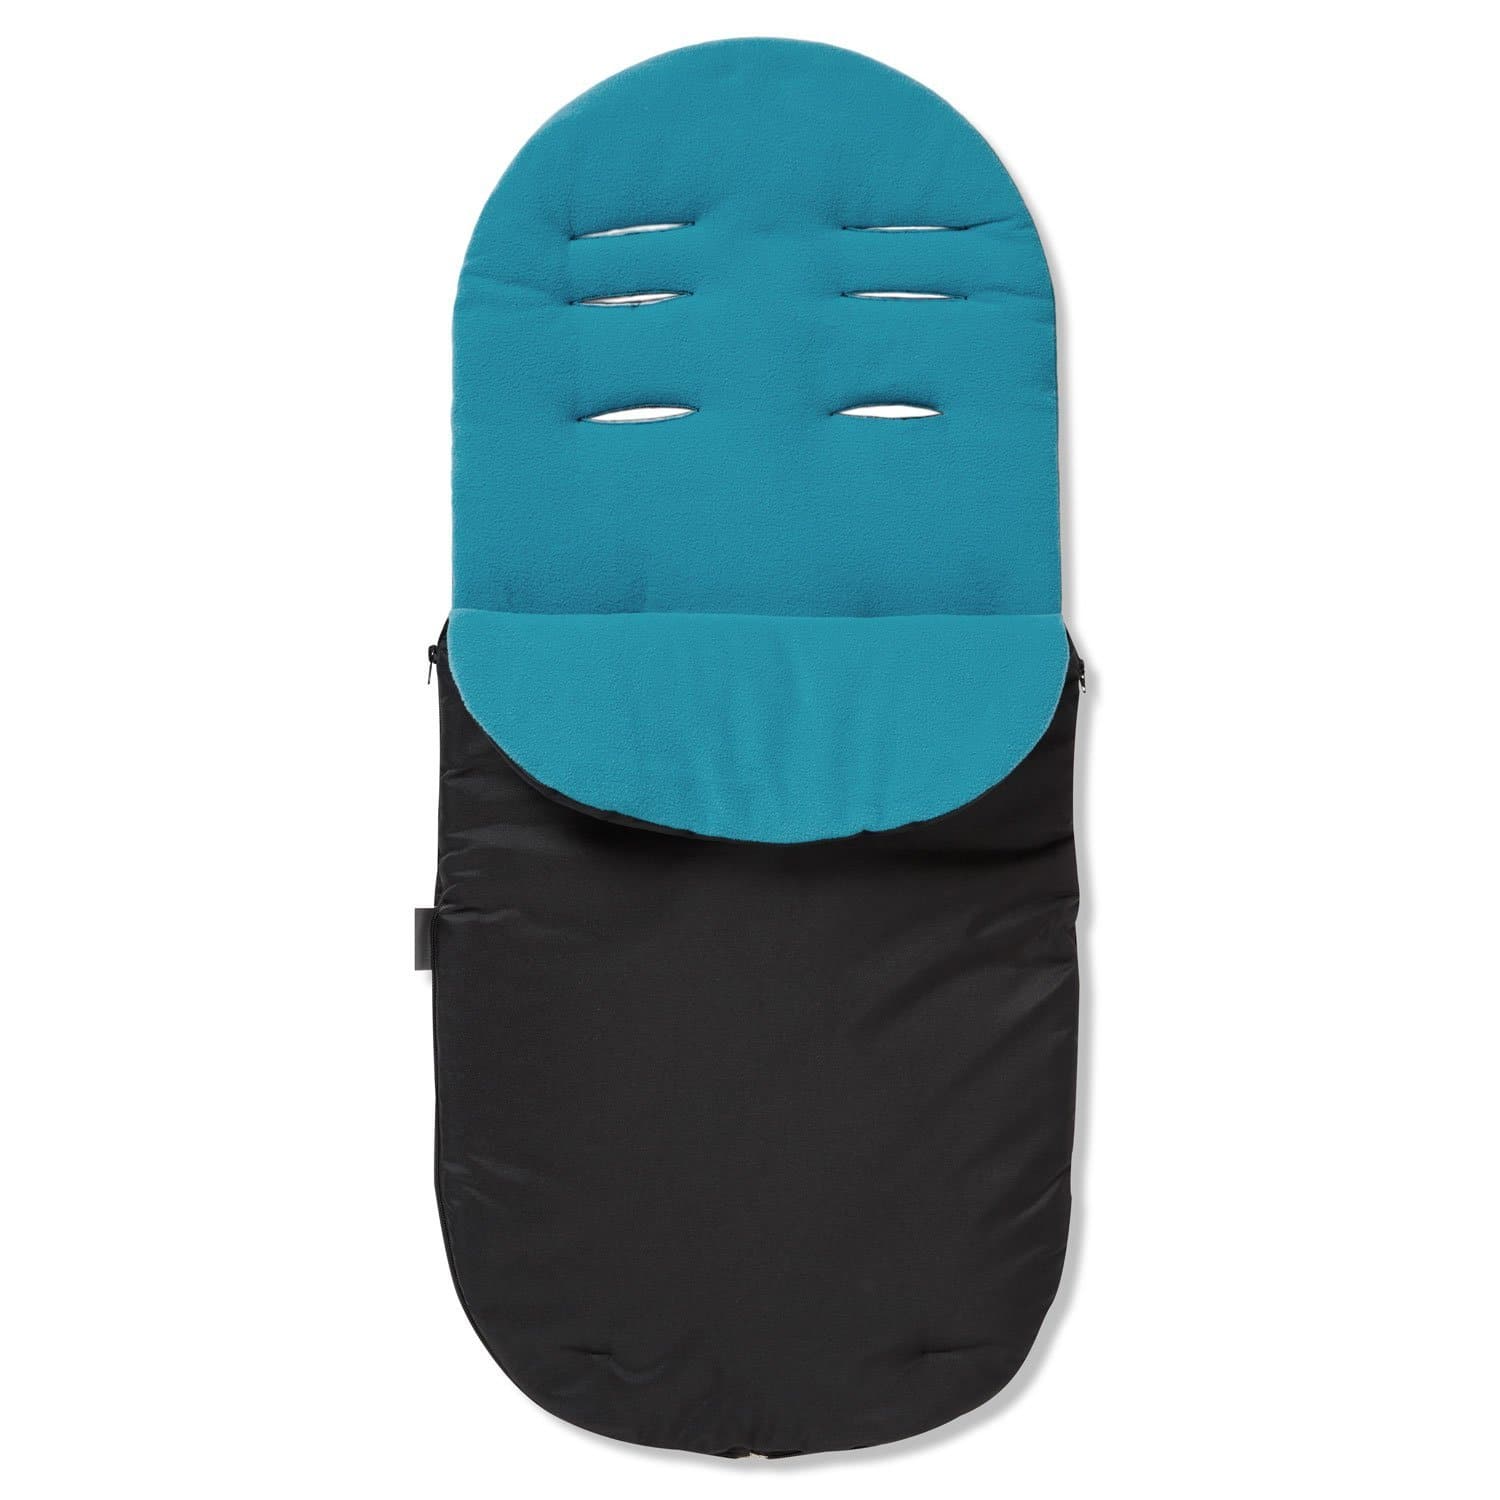 Footmuff / Cosy Toes Compatible with Brio - Turquoise / Fits All Models | For Your Little One